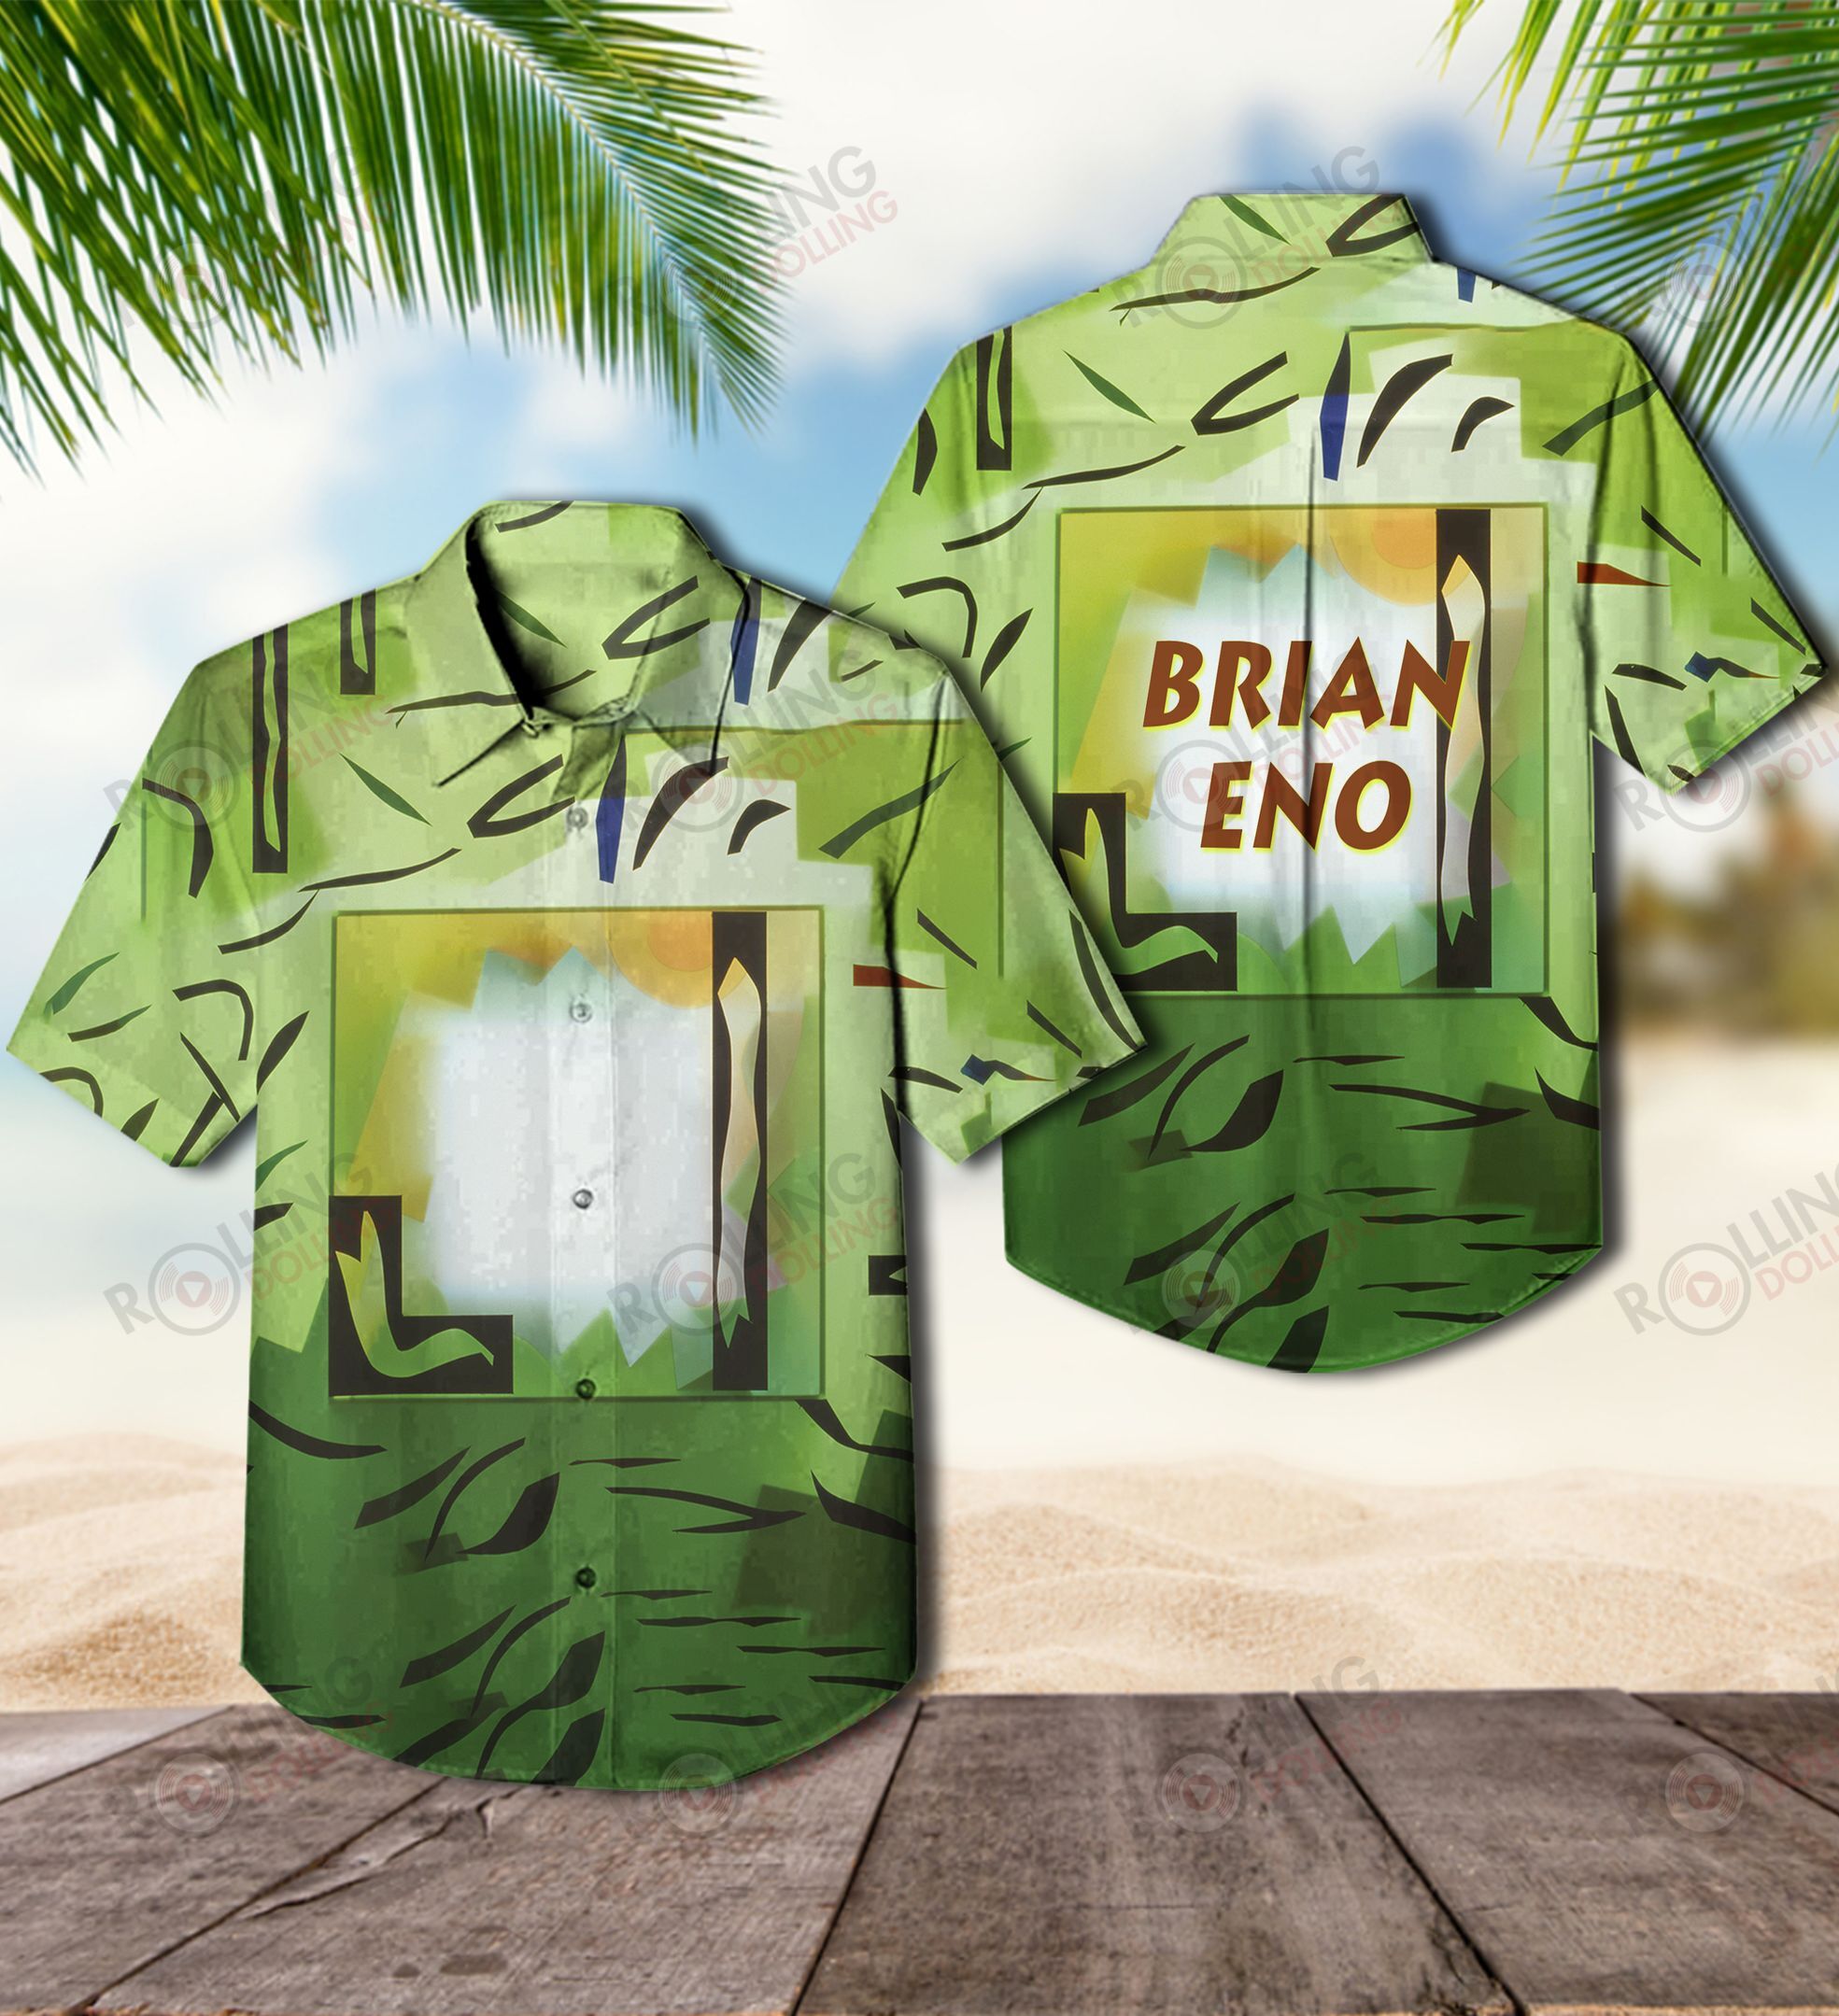 This would make a great gift for any fan who loves Hawaiian Shirt as well as Rock band 32